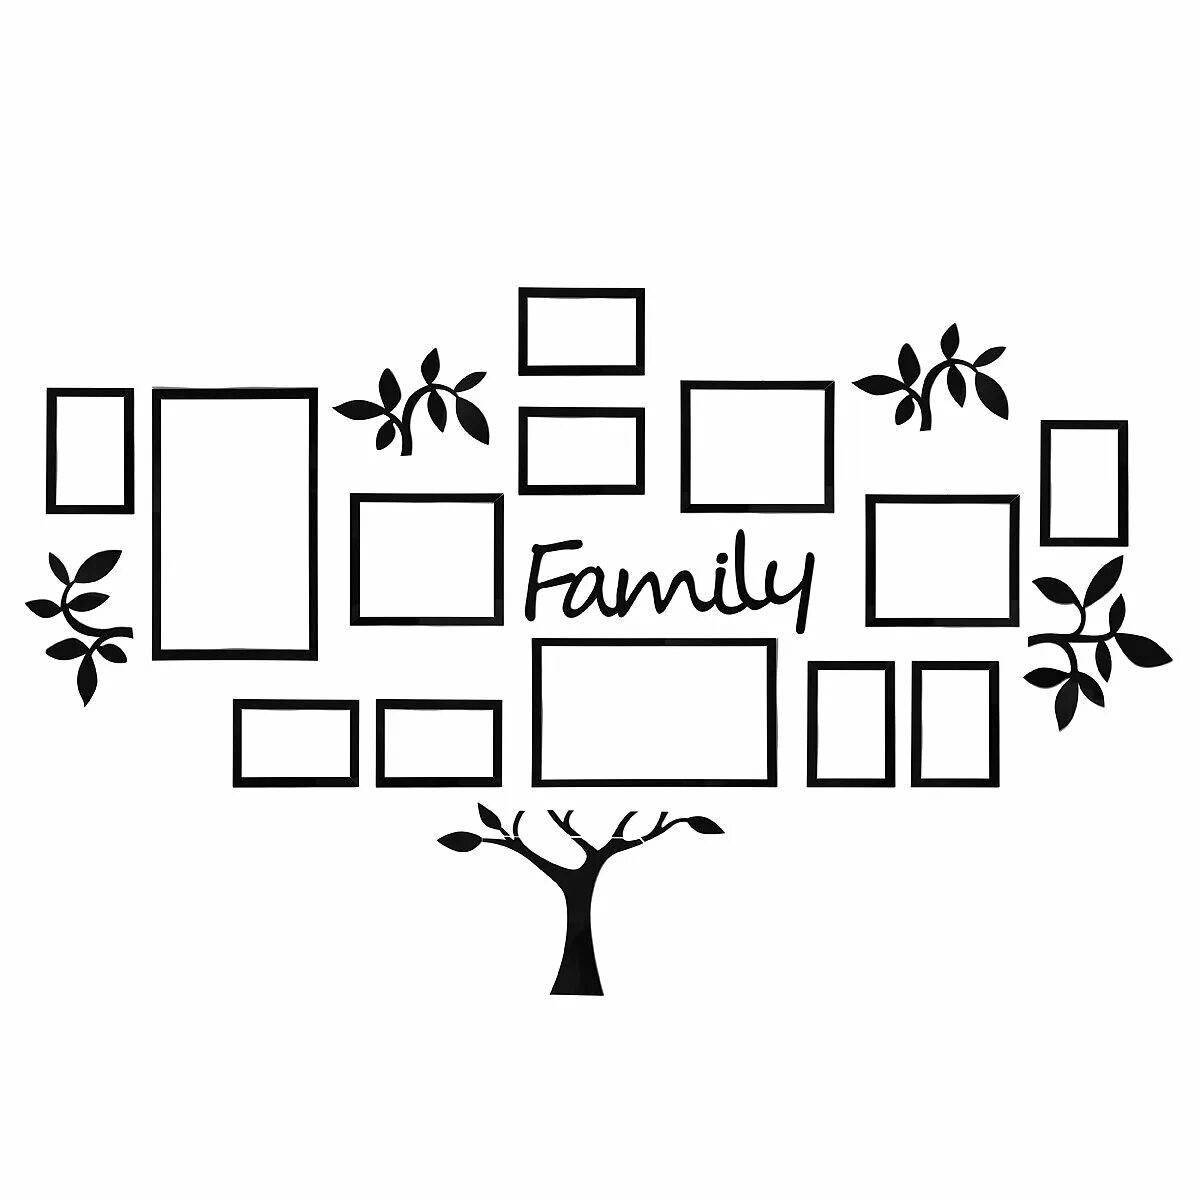 Fun family tree template for kids